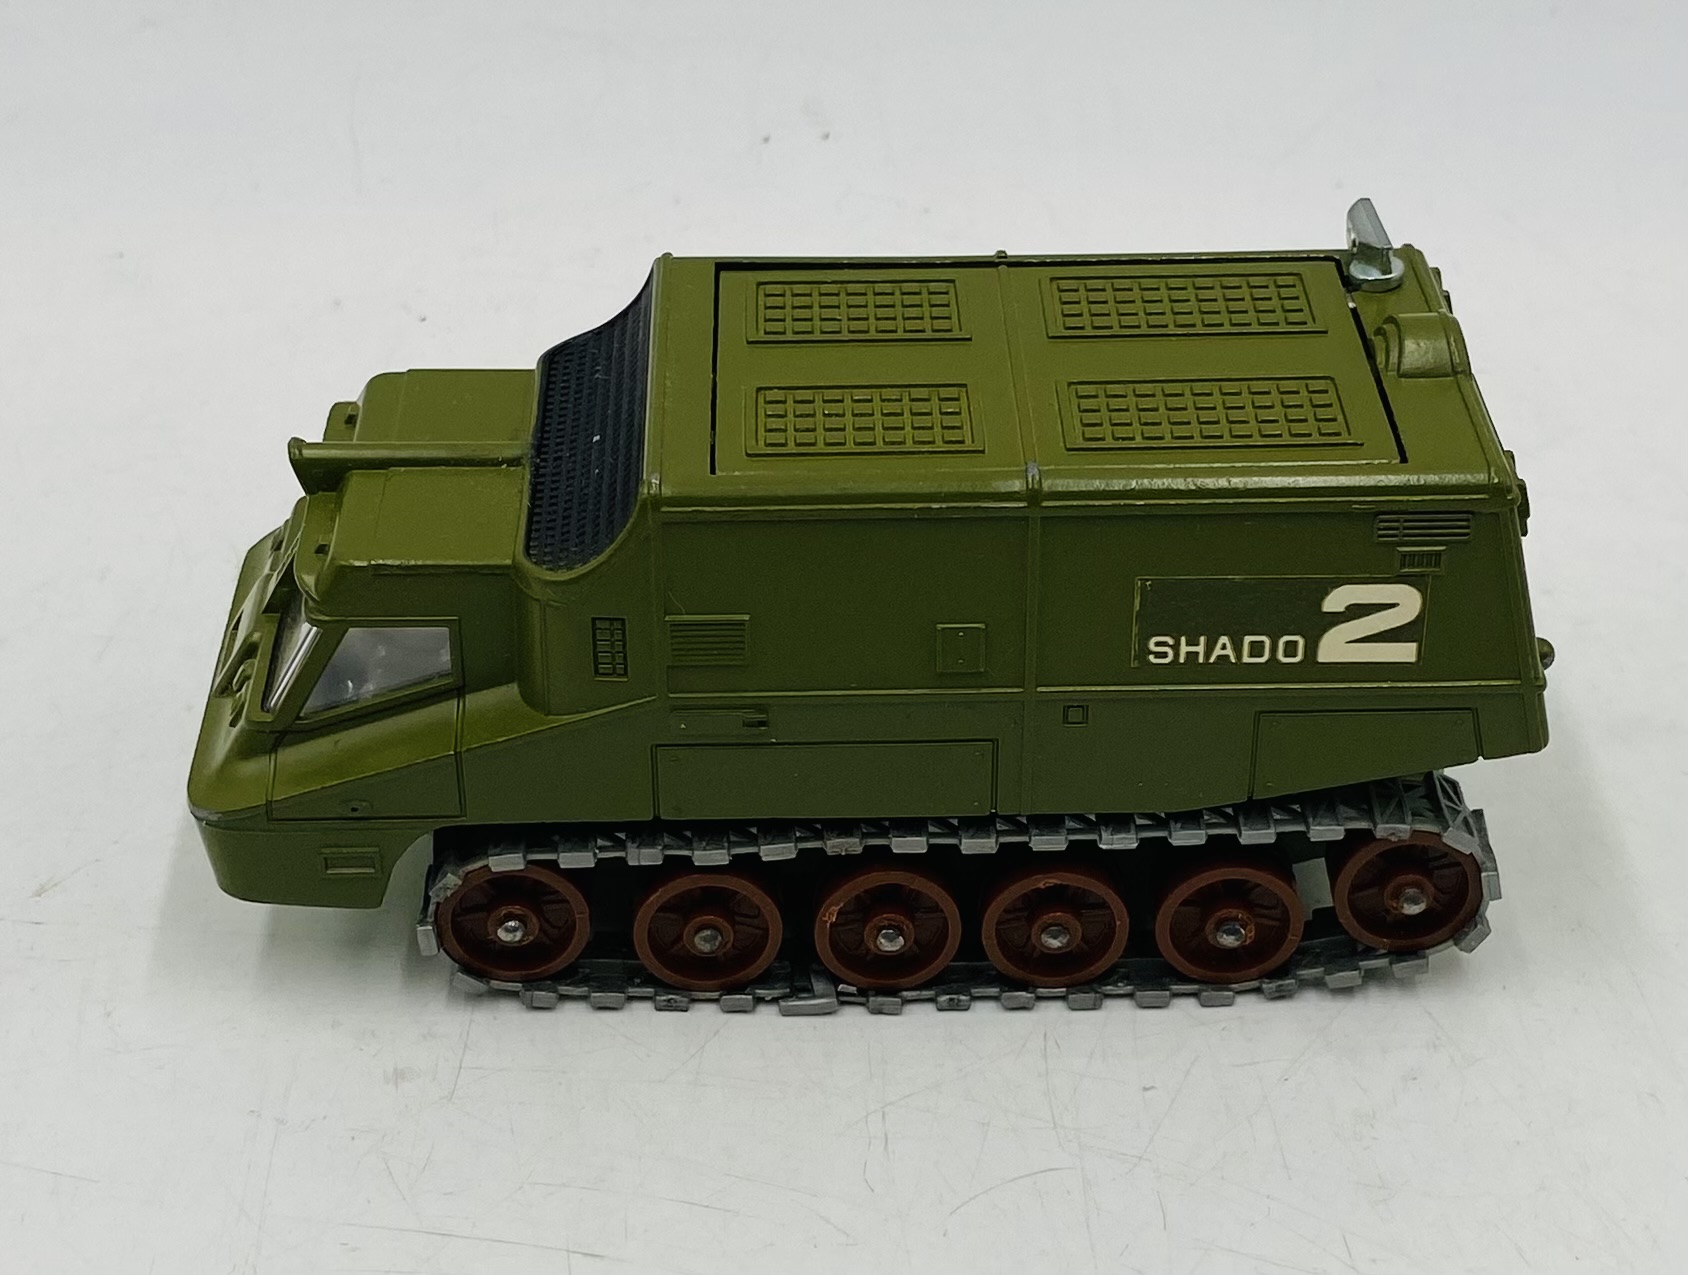 A vintage boxed Dinky Toys "Shado 2 Mobile" die-cast model (No 353) - Image 2 of 9